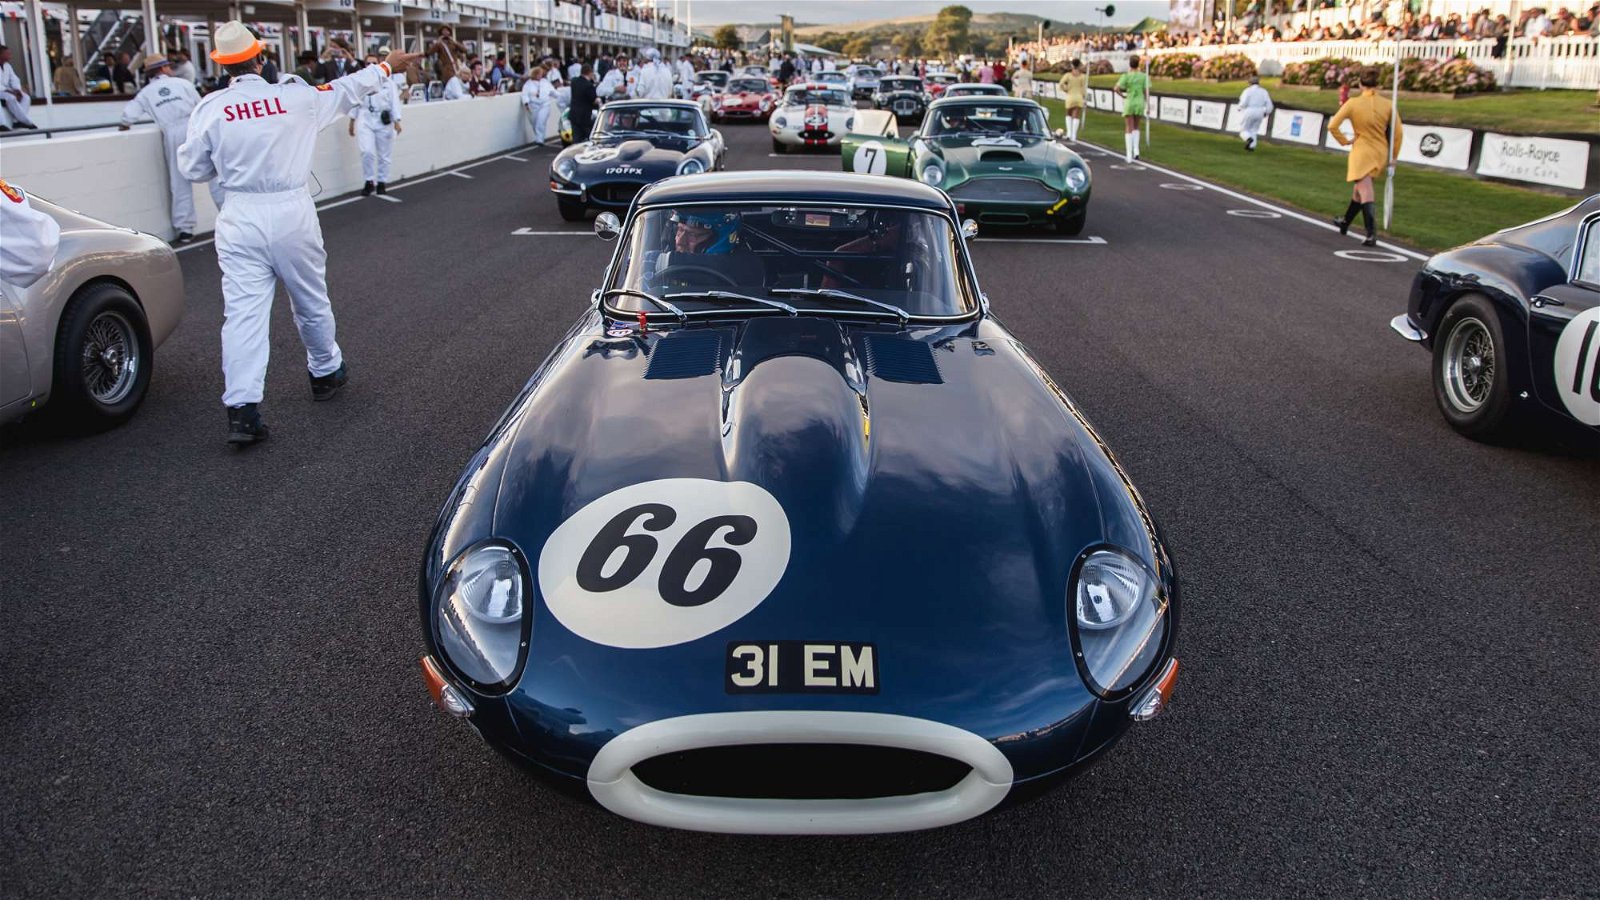 A Jaguar E-Type on the grid surrounded by more E-Types, Aston Martin DB4 GTs and Ferrari 250 GT SWBs. Taken by Tim Brown for Goodwood